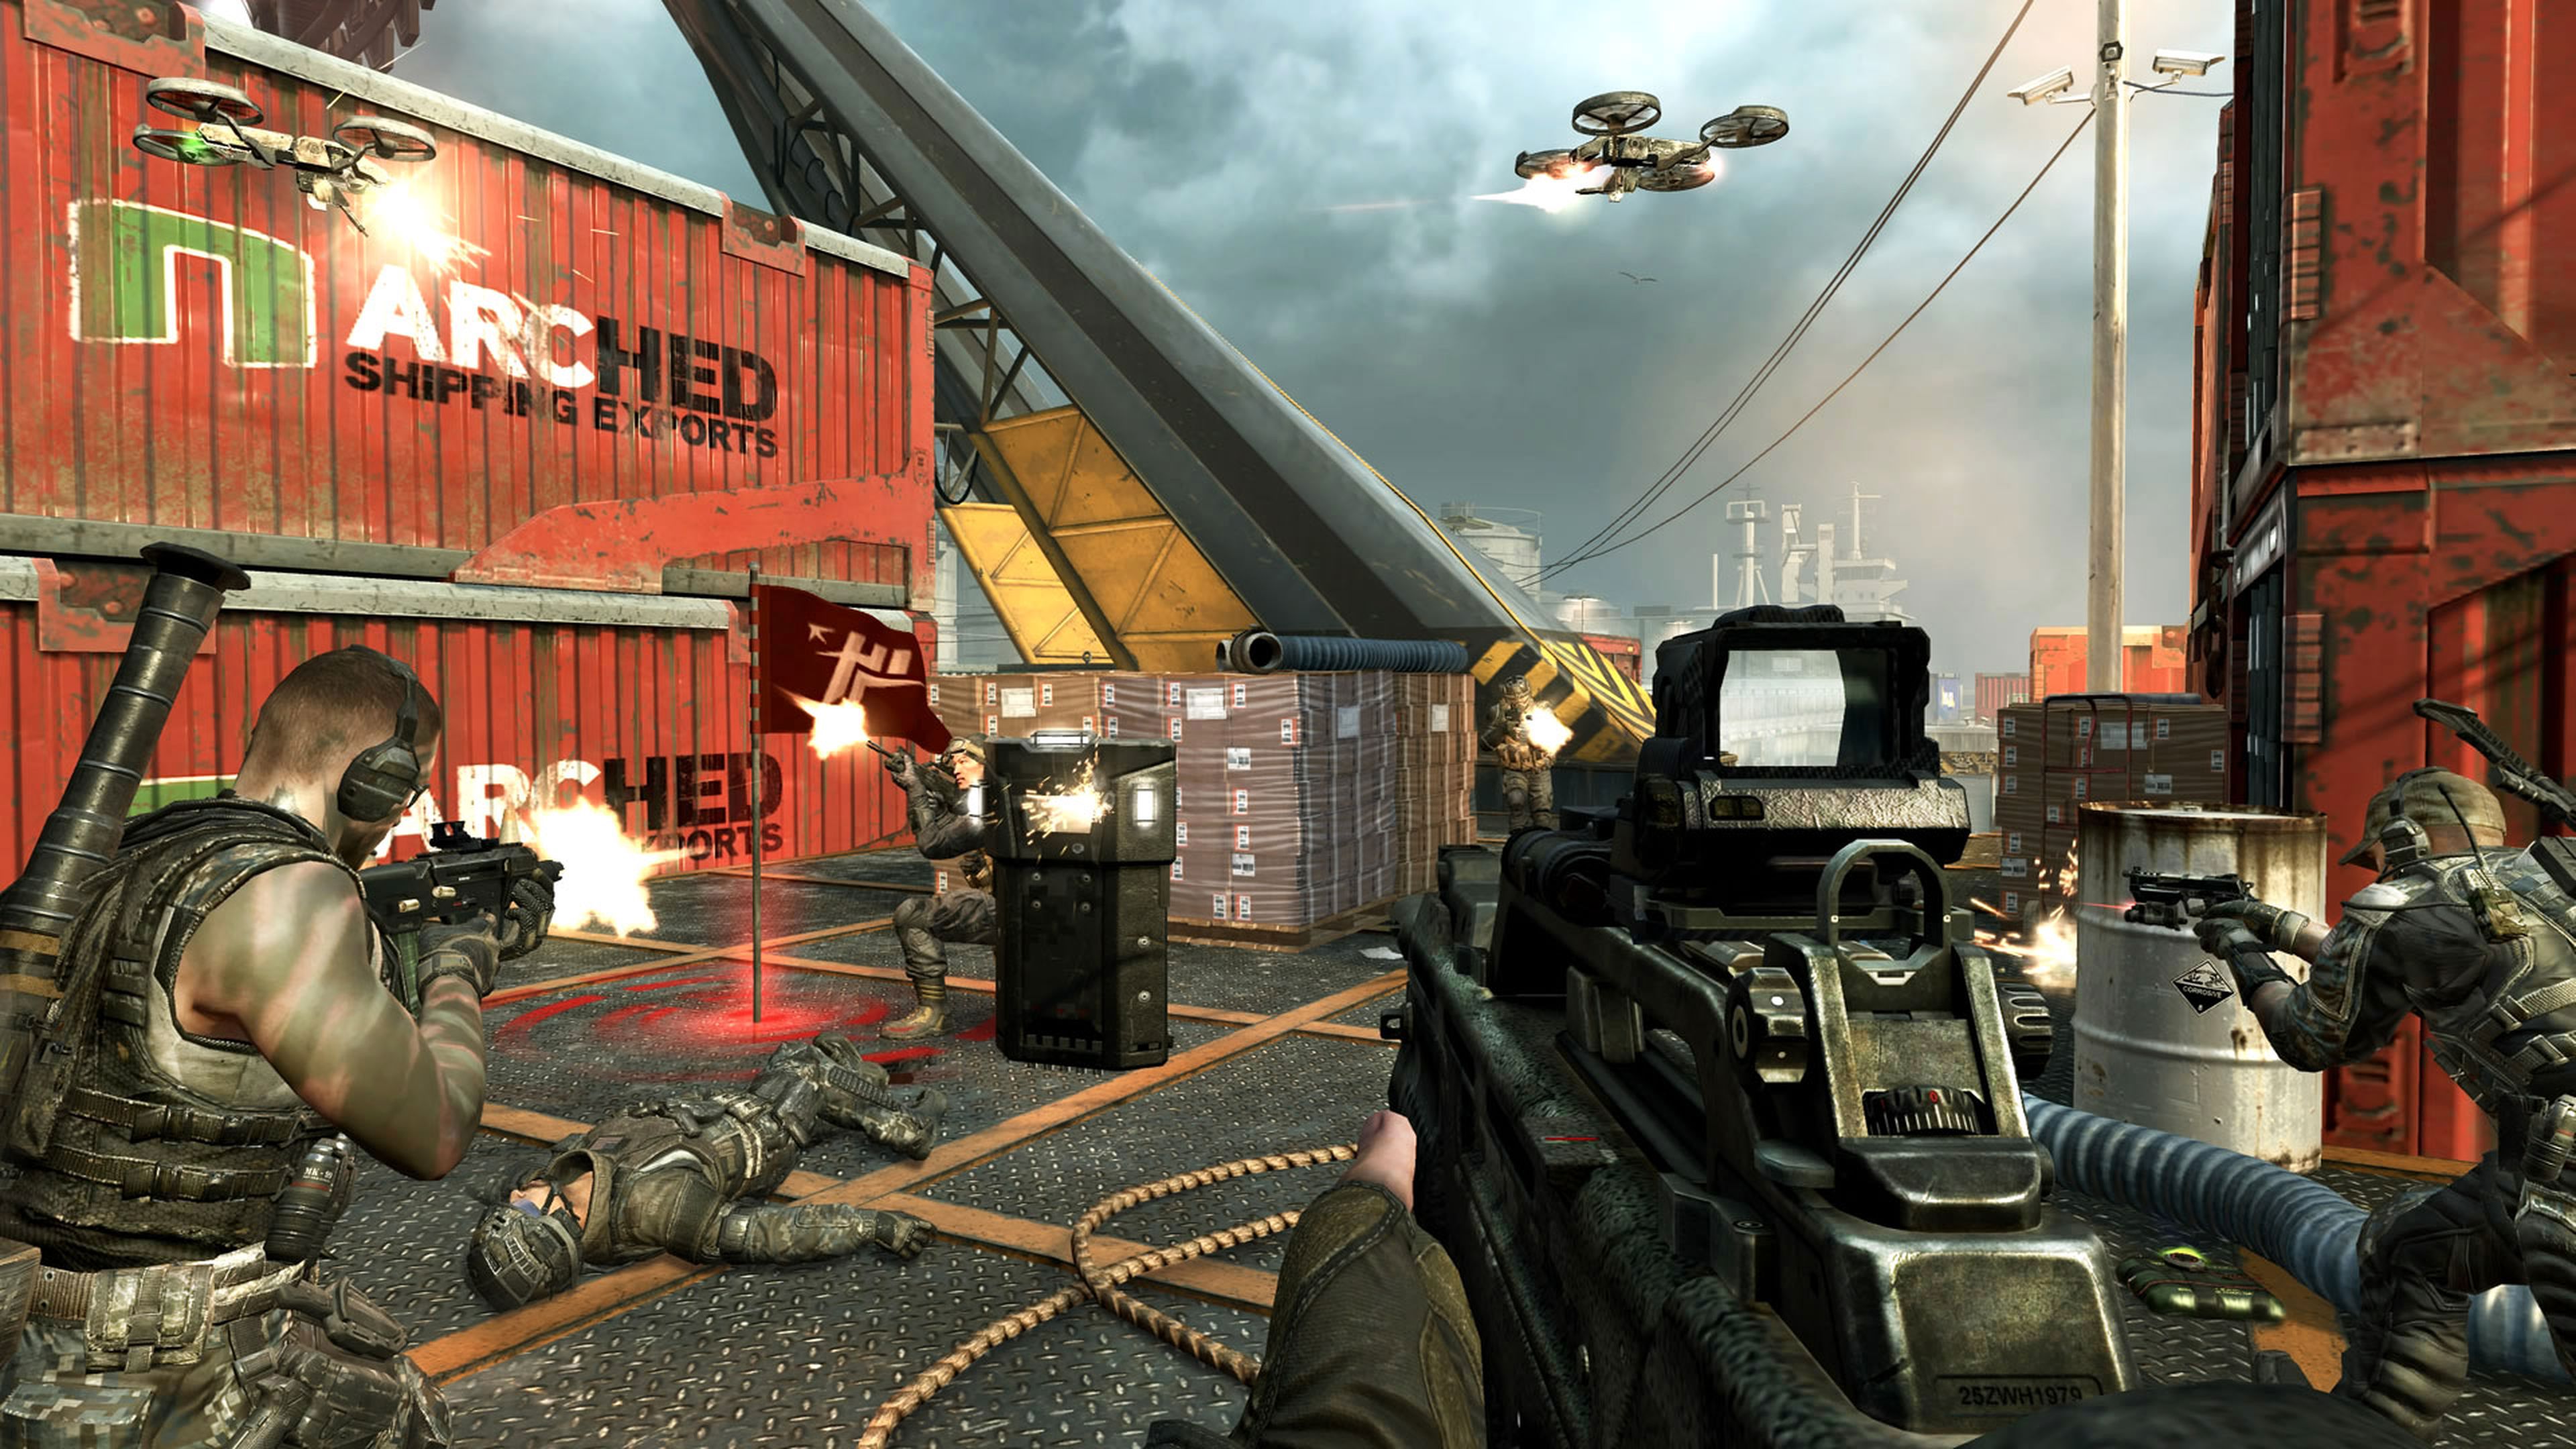 Call of Duty Black Ops 2 Multiplayer Event